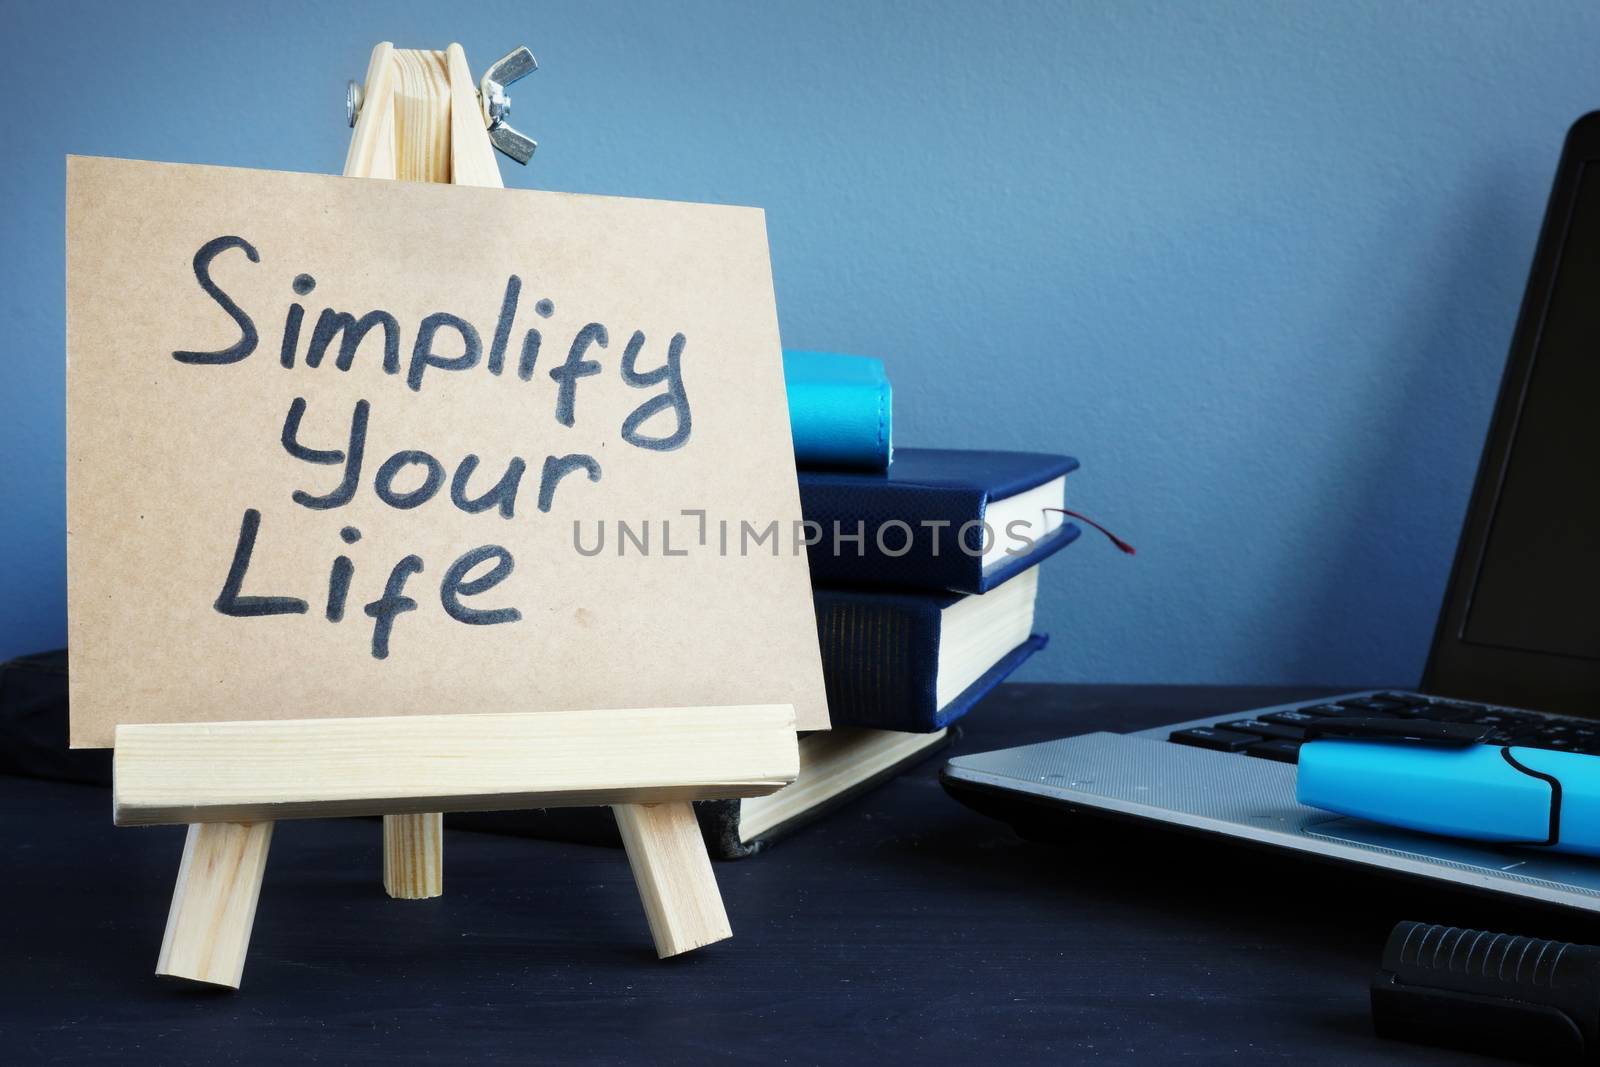 Simplify your life written on a piece of paper.